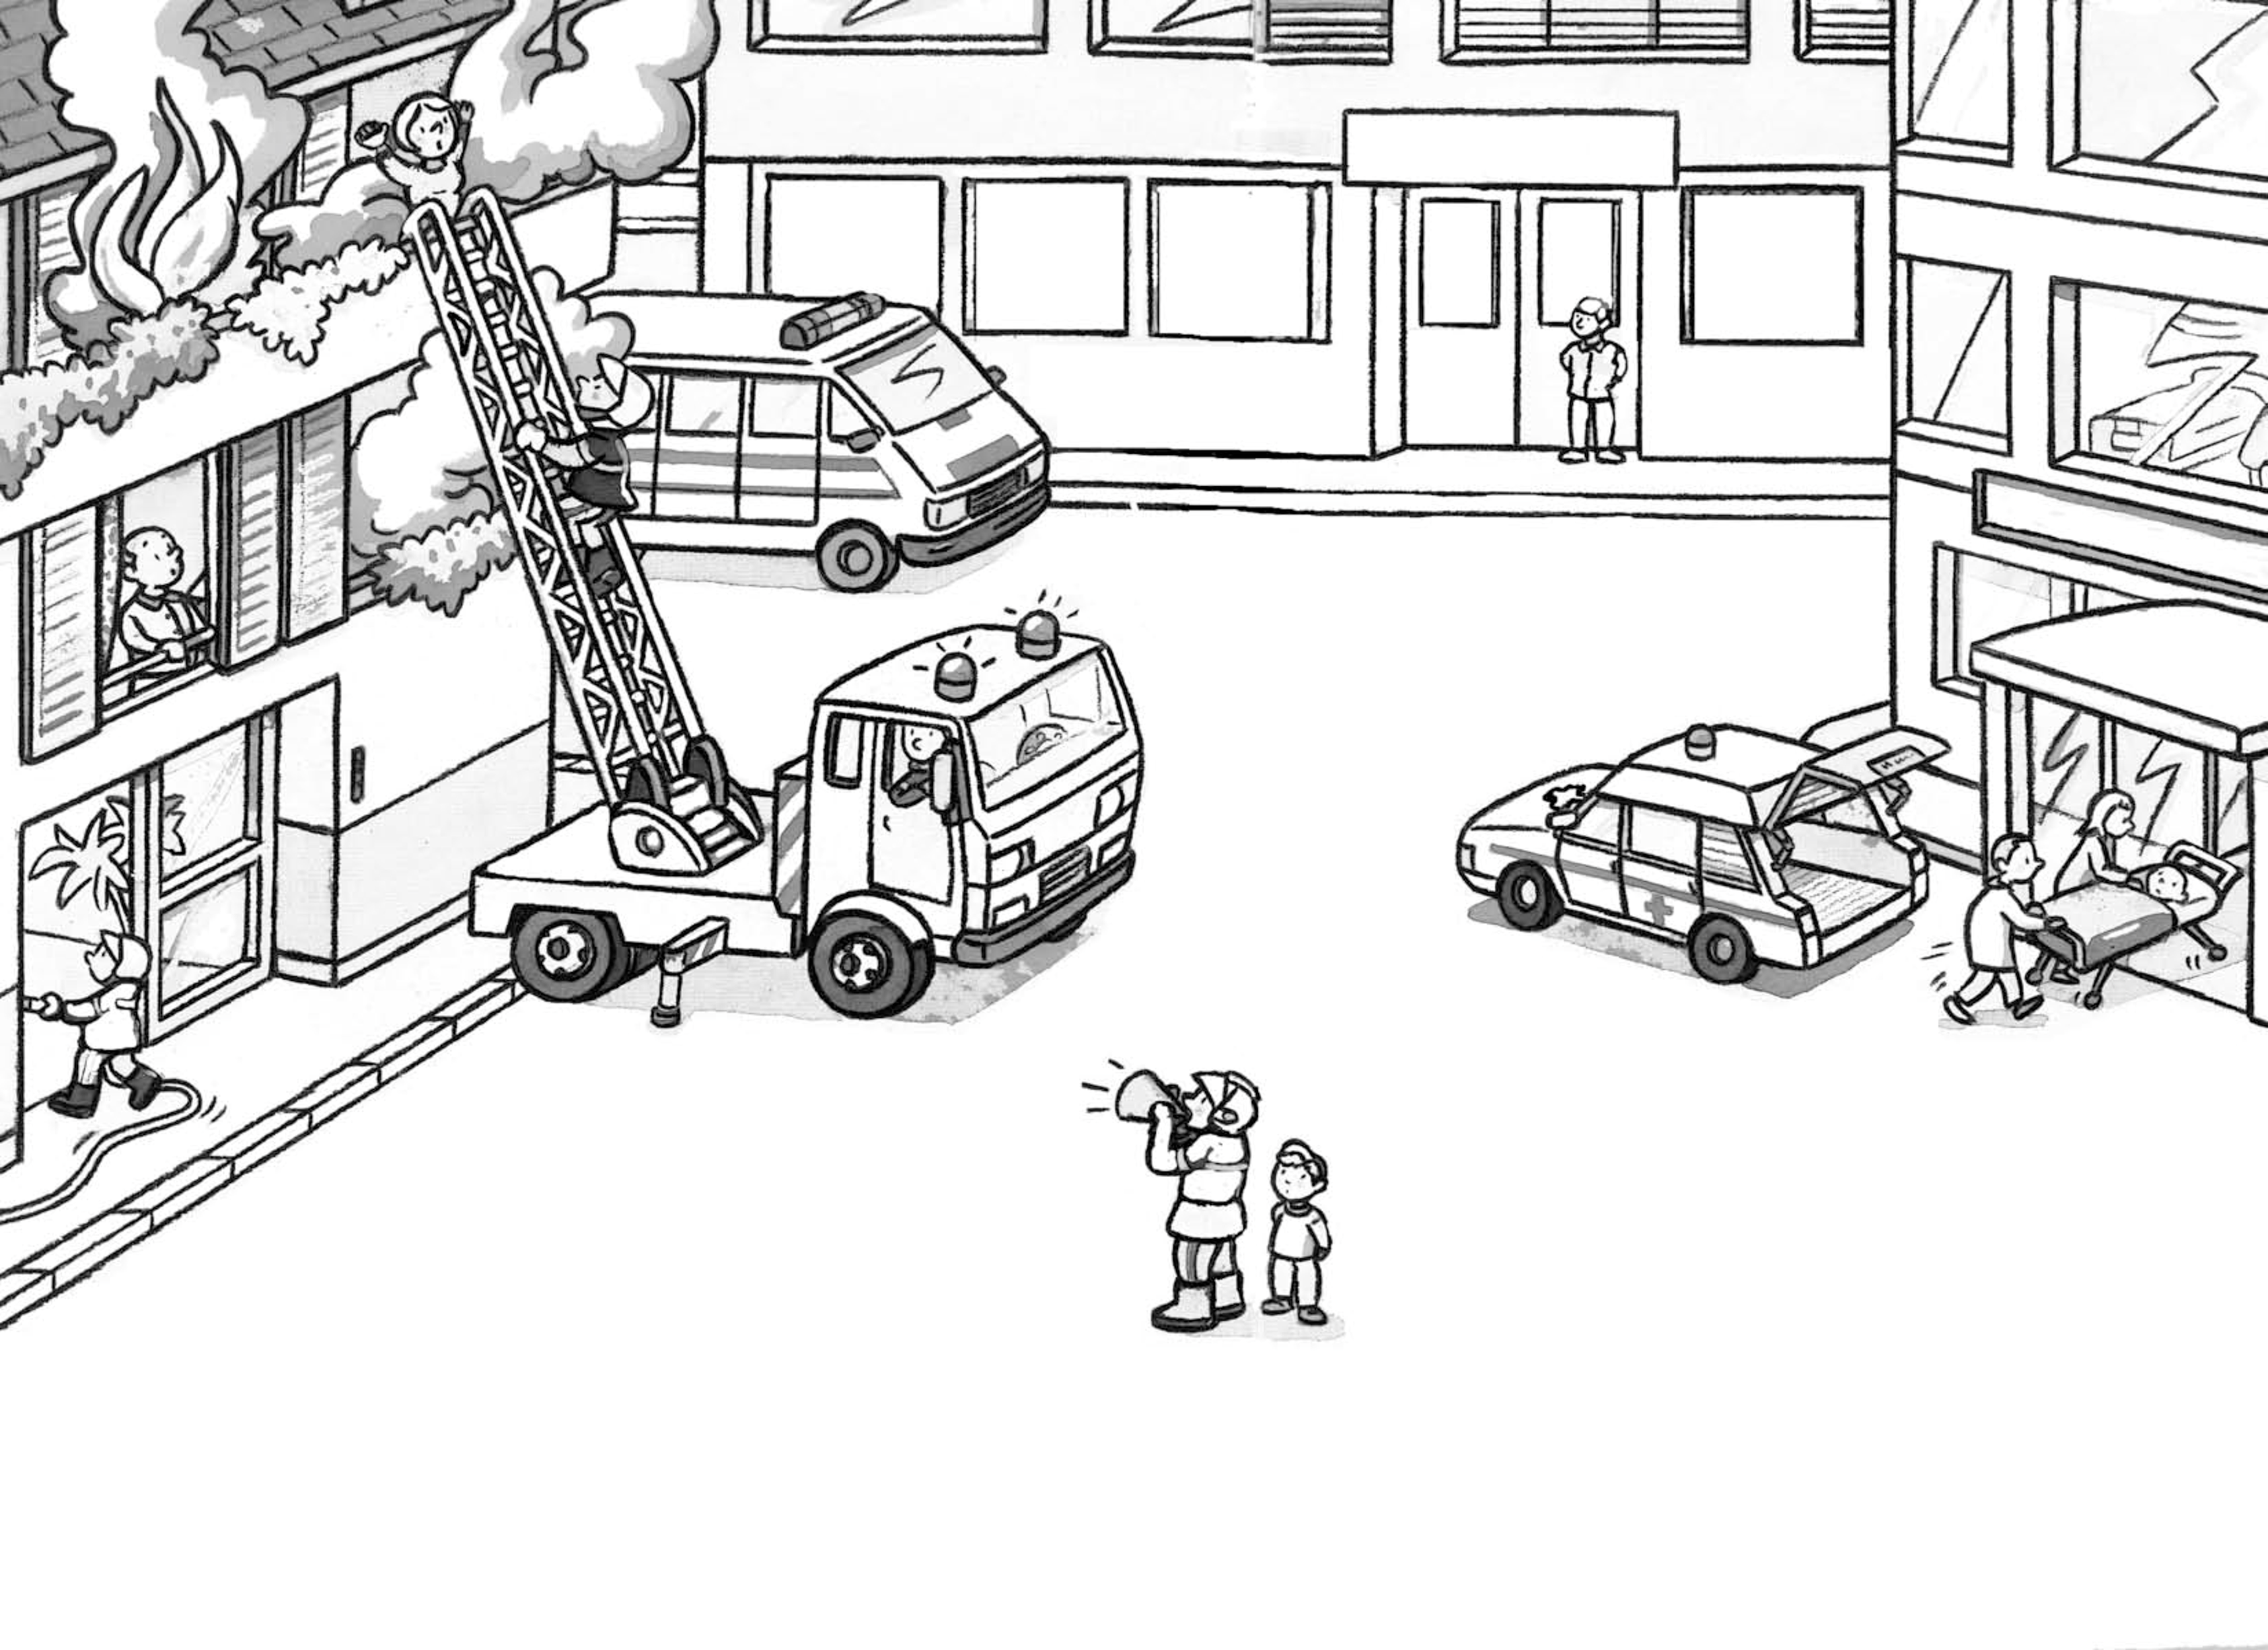 Ambulance Fire Truck Coloring Page - Coloring Pages For All Ages